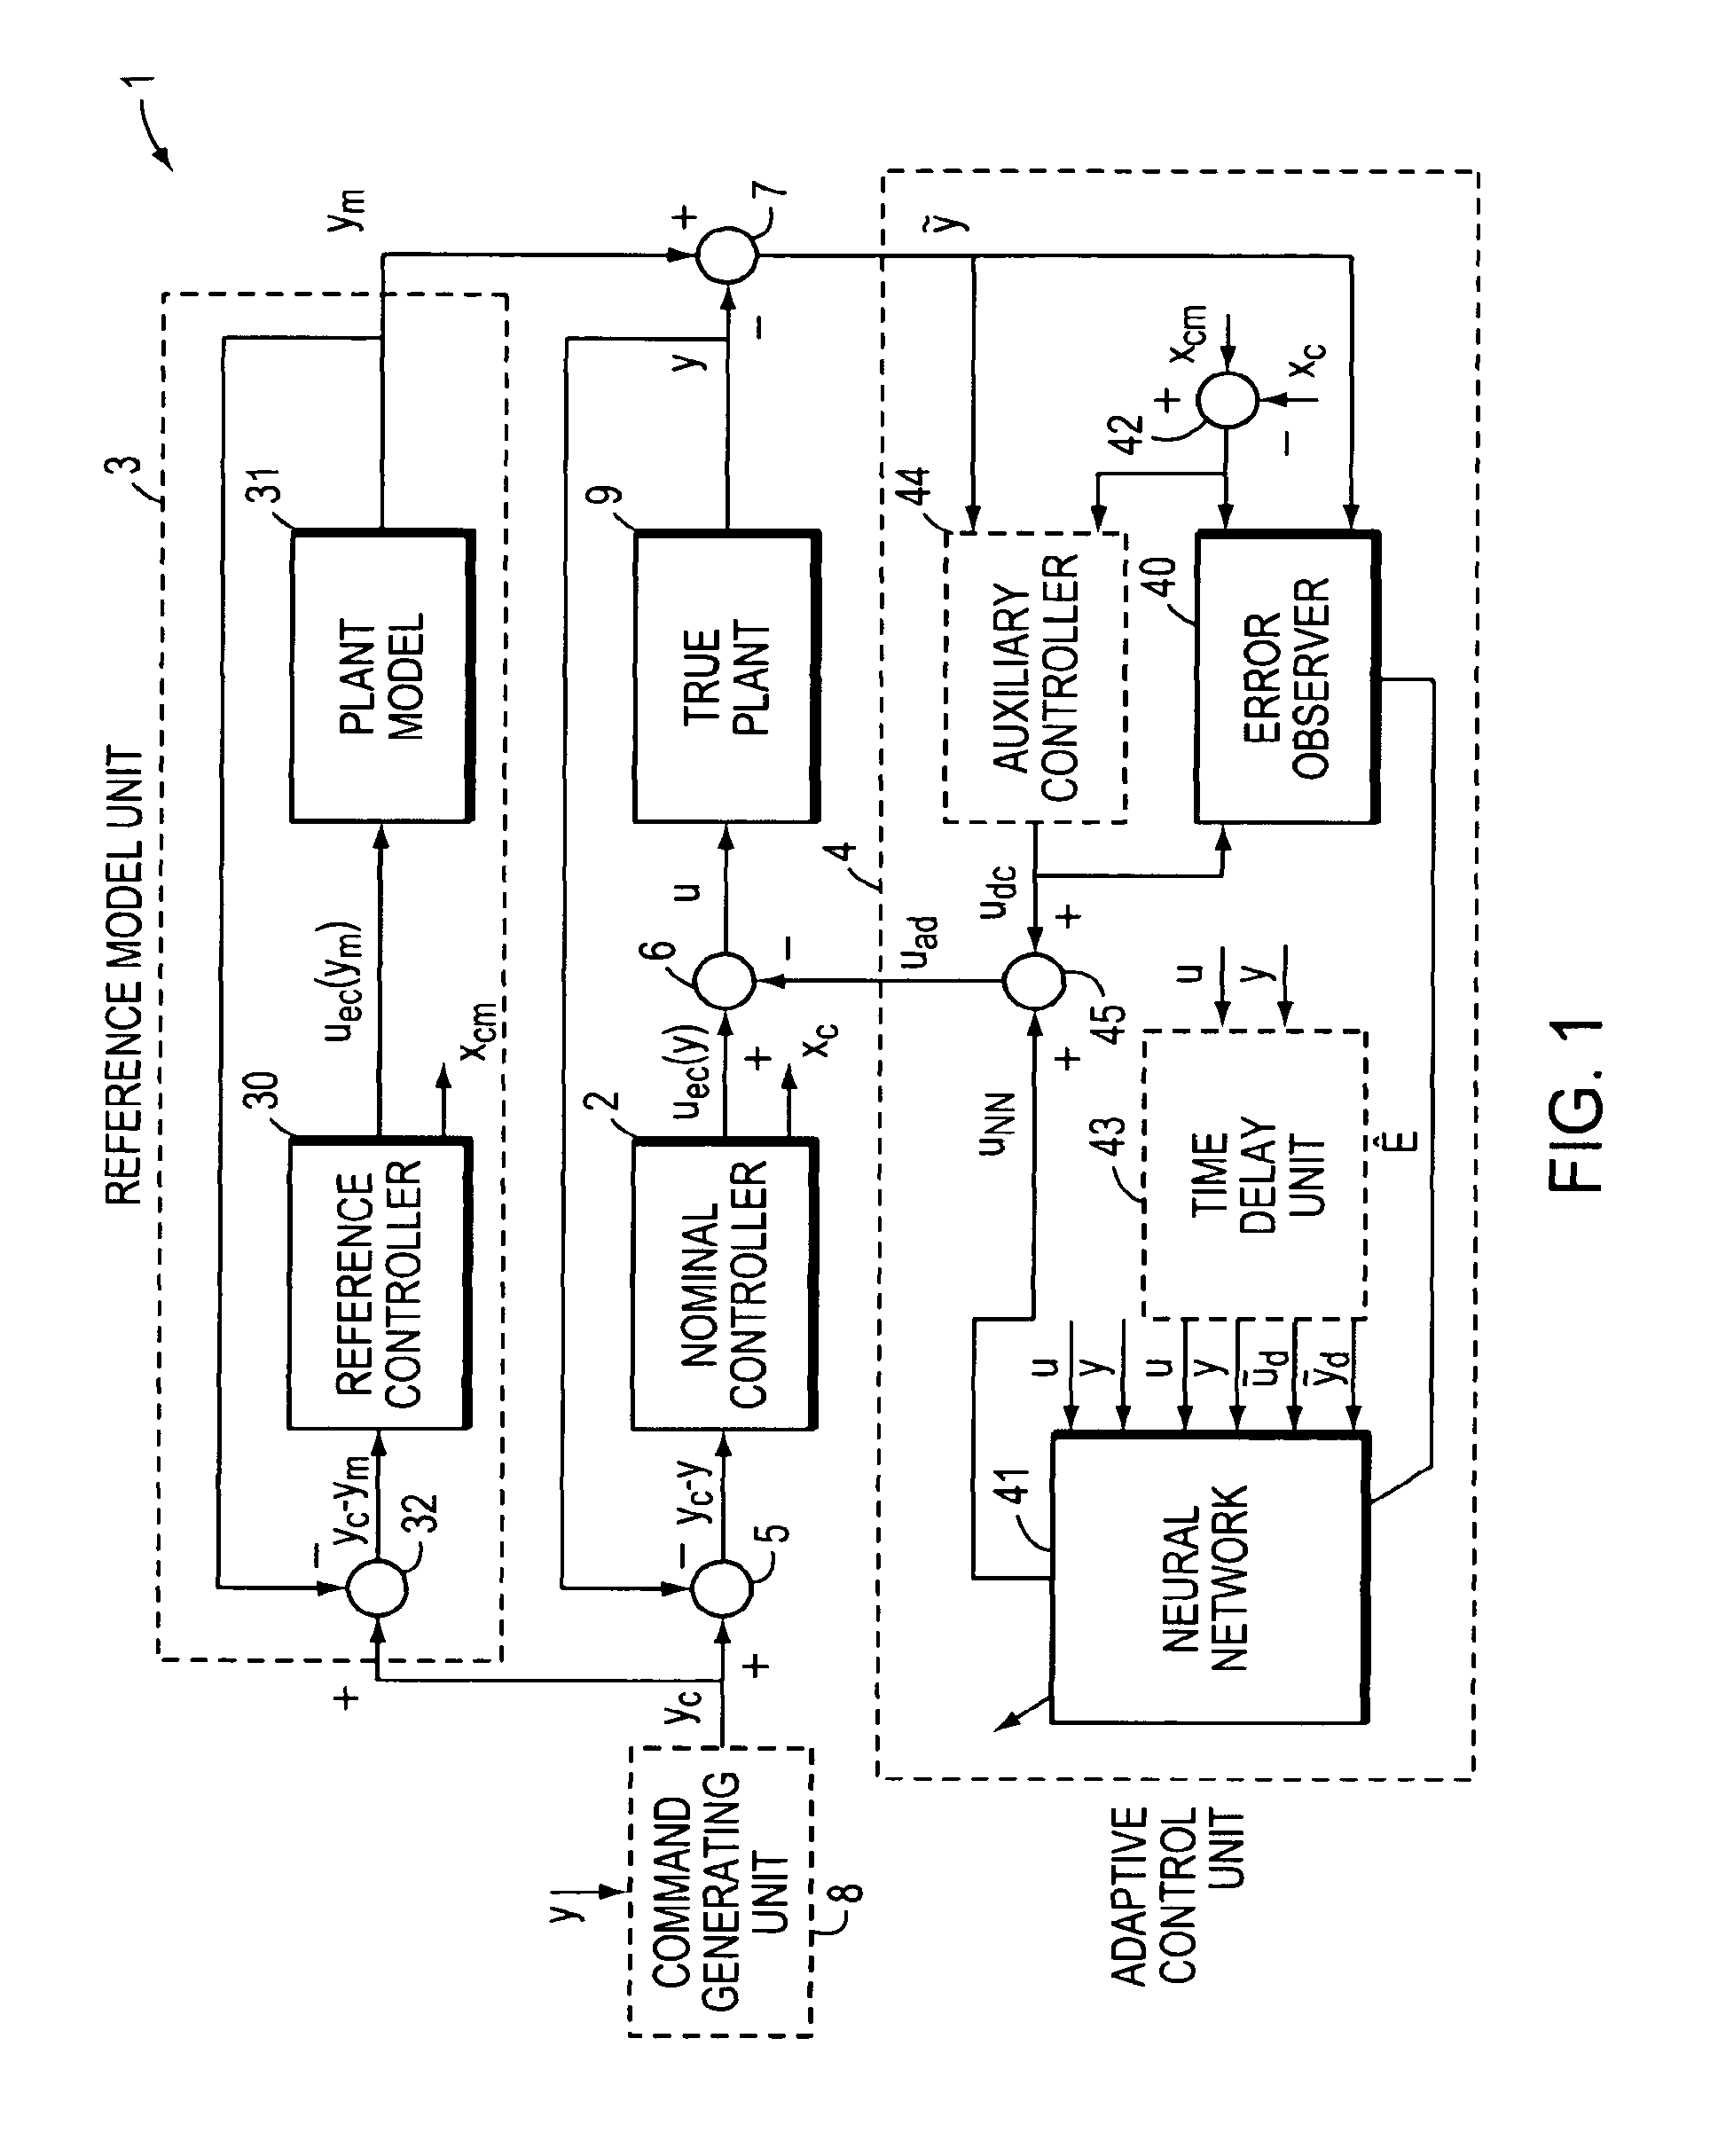 Adaptive output feedback apparatuses and methods capable of controlling a non-minimum phase system